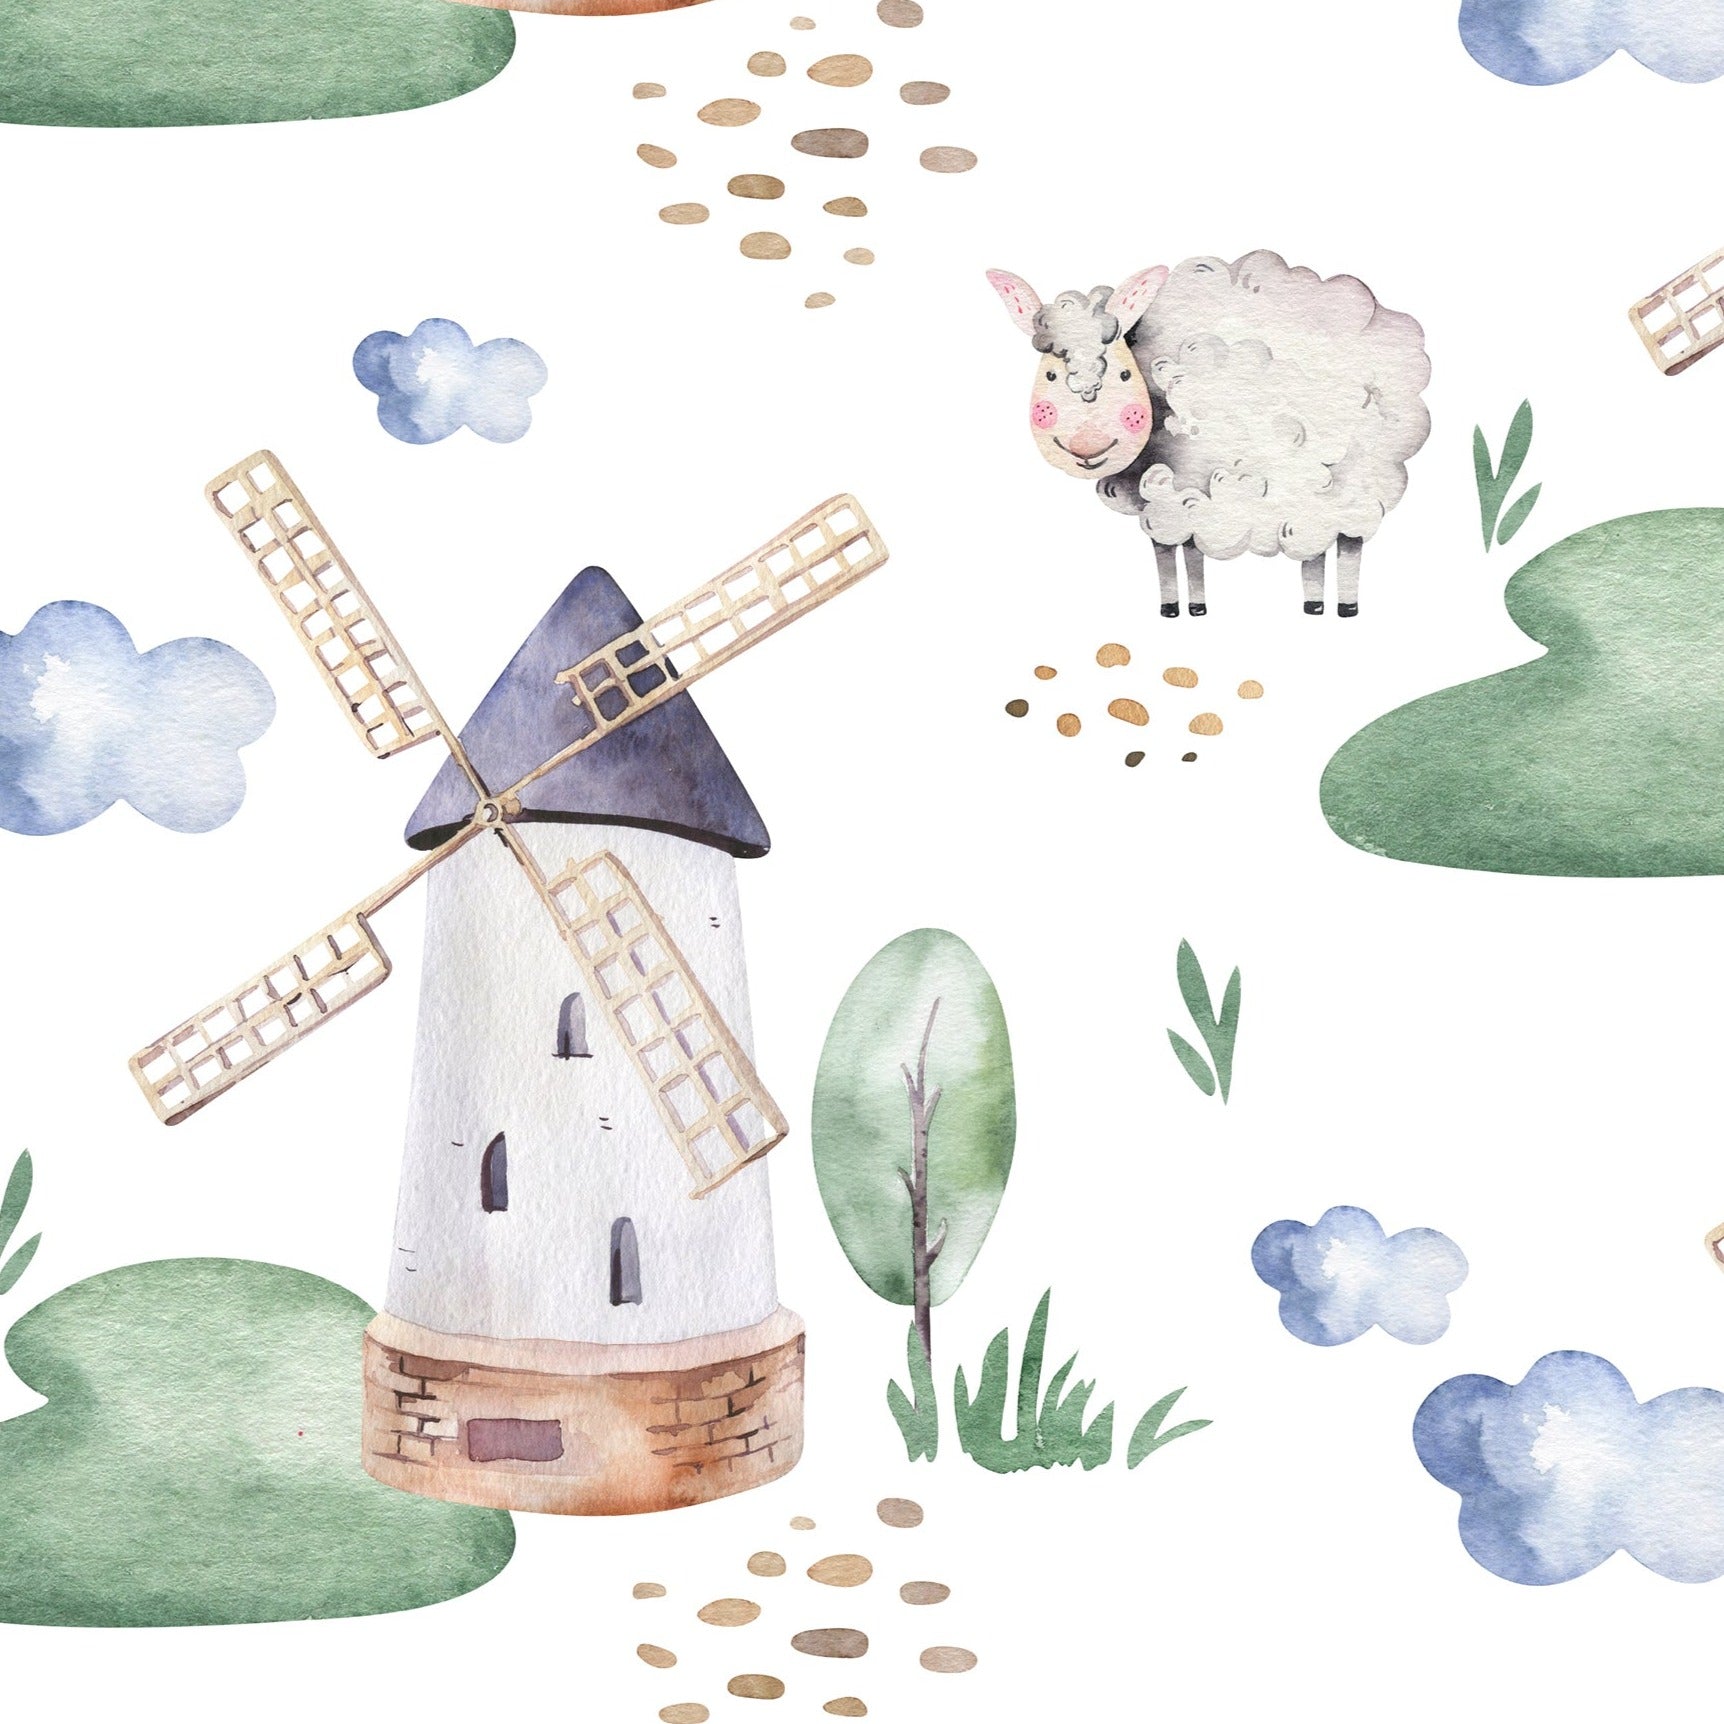 Watercolor Farm Animals IV wallpaper featuring whimsical windmills and fluffy sheep on green hillocks, interspersed with delicate watercolor trees, clouds, and pebble paths on a white background.